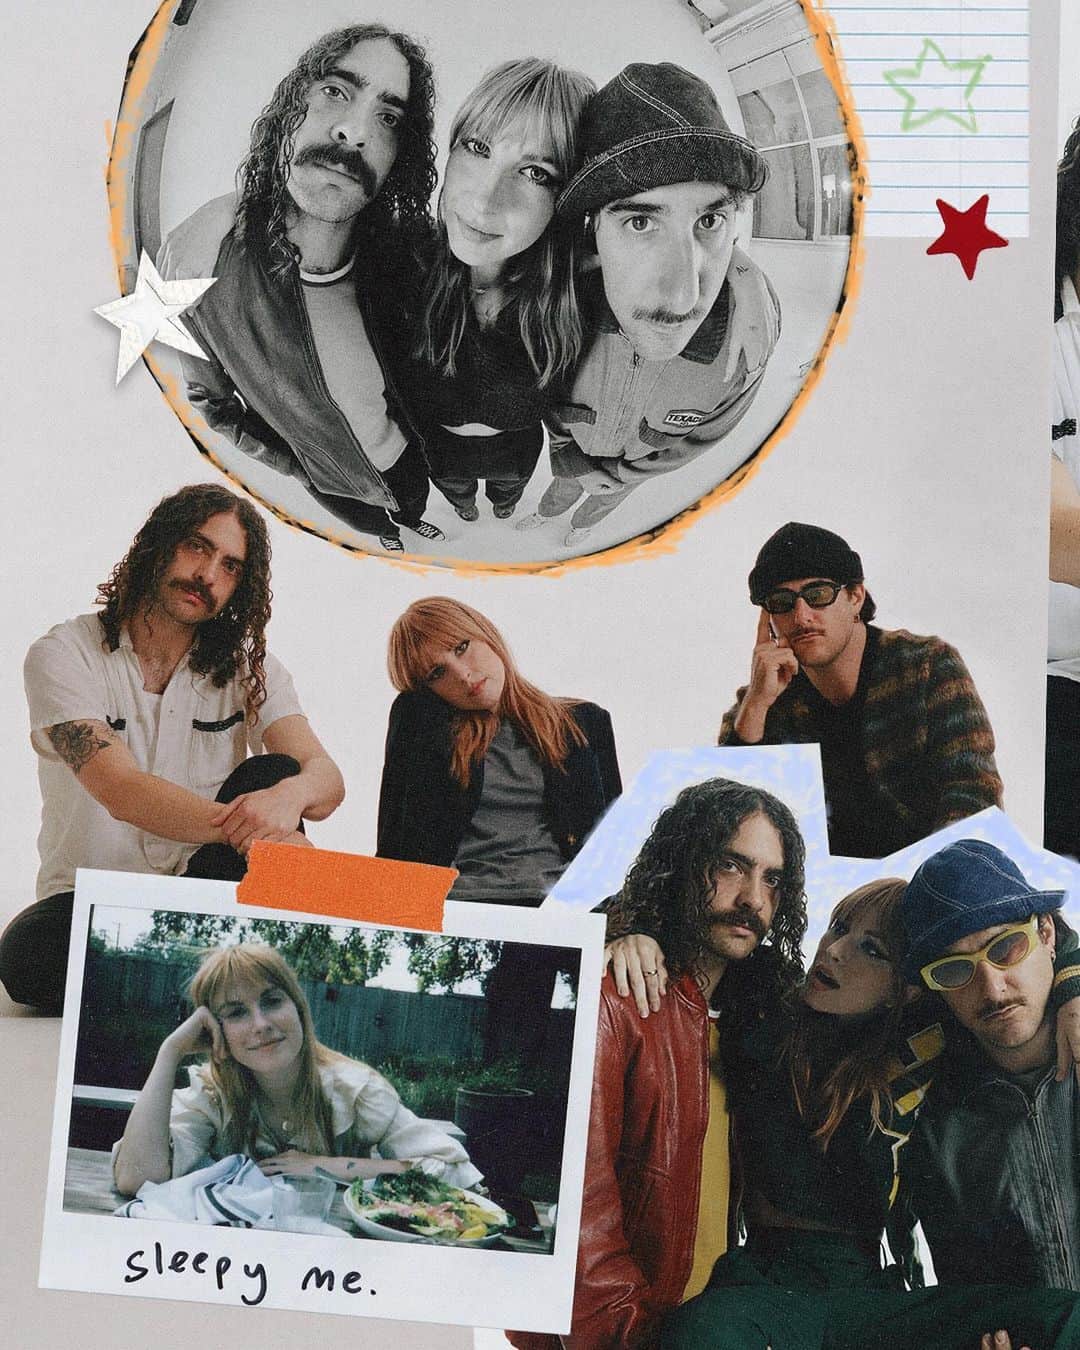 Paramoreのインスタグラム：「🗞️ This is not a story about a chosen one. This is a story about how three star-crossed teenagers found each other at the exact right time when they needed connection and community - banding together to become the very best of friends despite being catapulted head-first by an unrelenting universe into nearly two decades of extreme trials and tribulations. Some would call it growing up, but what Zac Farro, Hayley Williams, and Taylor York have collectively experienced as cross-generational beloved band, Paramore, feels somewhat more akin to the infamous astrological phenomenon: a Saturn Return.  Usually beginning around the age of 27, it seems apt that Paramore's Saturn Return arrived a decade early, having already been forced into a pressure-cooker of adult responsibilities and adult conflict forming the band so early in their youth. Anyone less tenacious would have given up, and would have been valid in doing so, but it's funny how rock-bottom darkness can shine a new light over your life - not to show a way back, but instead to help you forge a new path forward. It's been a rollercoaster, to say the least, but Paramore have always defied gravity with a cat-like mettle.  In advance of the band's much anticipated return to New Zealand and Australia this month (during which they will play the biggest sold-out Australasian shows of their career), Coup De Main is invited to visit the band in their adopted hometown of Nashville, Tennessee. Over brunch, I temporarily experience what it's like to be part of the tight-knit trio: an entire secret language of never-ending in-jokes, chaotic ADHD segues, and the unconditional support of a chosen family who have proven time and time again that they will always find their way home to each other.  𝕆𝕦𝕣 𝕟𝕖𝕨 @paramore 𝕔𝕠𝕧𝕖𝕣 𝕤𝕥𝕠𝕣𝕪 𝕚𝕤 𝕠𝕦𝕥 𝕟𝕠𝕨 - 𝕝𝕚𝕟𝕜 𝕚𝕟 𝕓𝕚𝕠 𝕥𝕠 𝕣𝕖𝕒𝕕 𝕠𝕦𝕣 𝕟𝕖𝕨 𝕚𝕟𝕥𝕖𝕣𝕧𝕚𝕖𝕨 𝕨𝕚𝕥𝕙 @tayloryorkyall @yelyahwilliams @zacfarro 🧡  interview: shahlin graves design: @lola.jacob photography: @zacharygray styling: @lindseyhartman hair + makeup: @colormebrian ⏰」